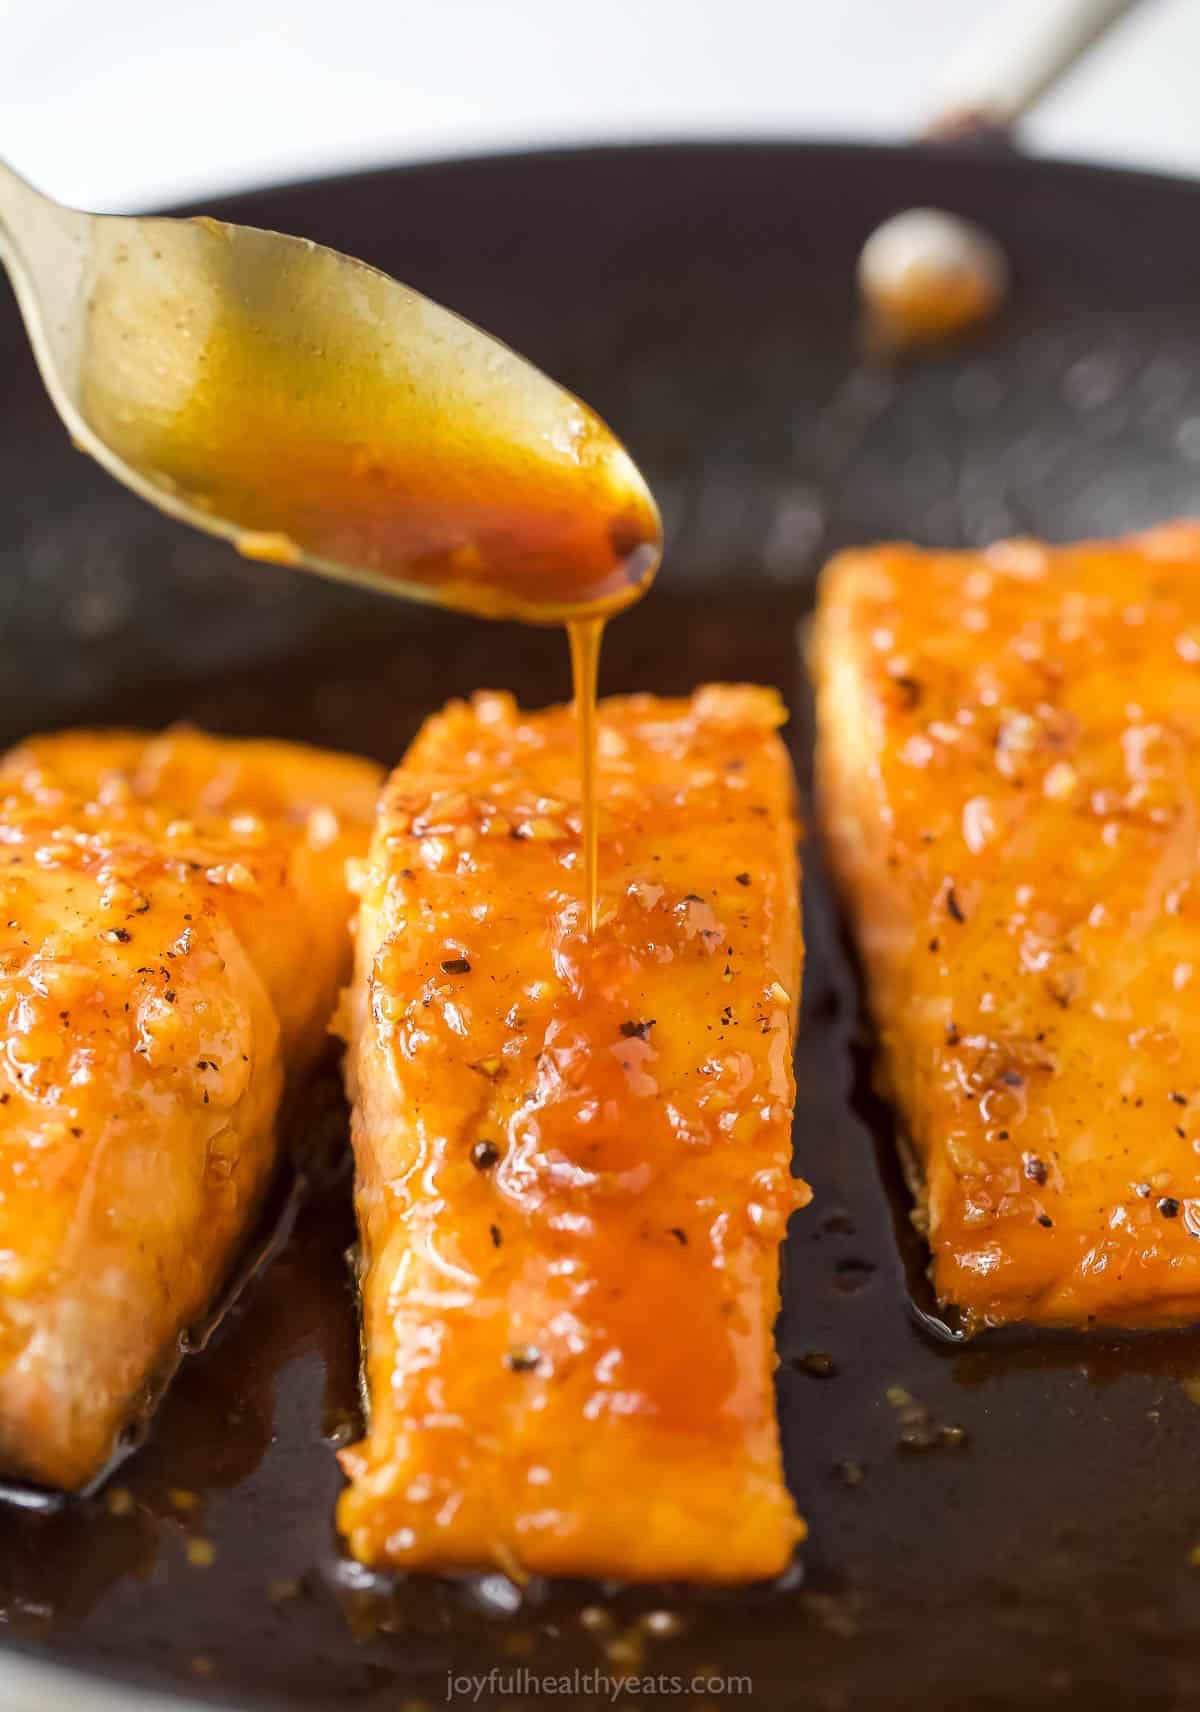 S،ing the sauce over the salmon. 